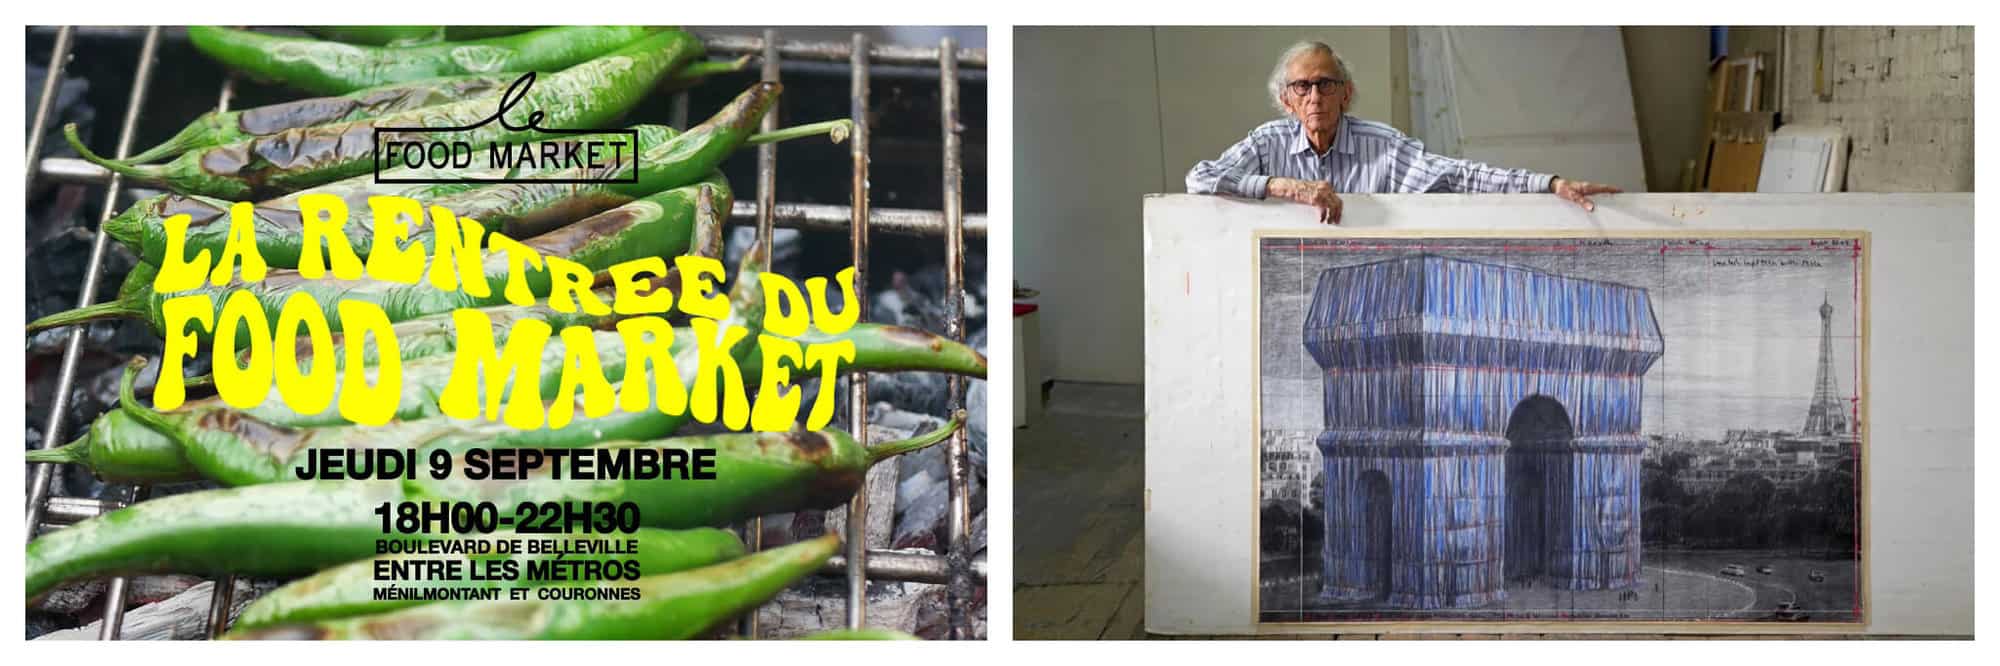 Left: promotional image for La Rentree du Food Market. Right: Christo with a drawing of the Eiffel Tower wrapped.